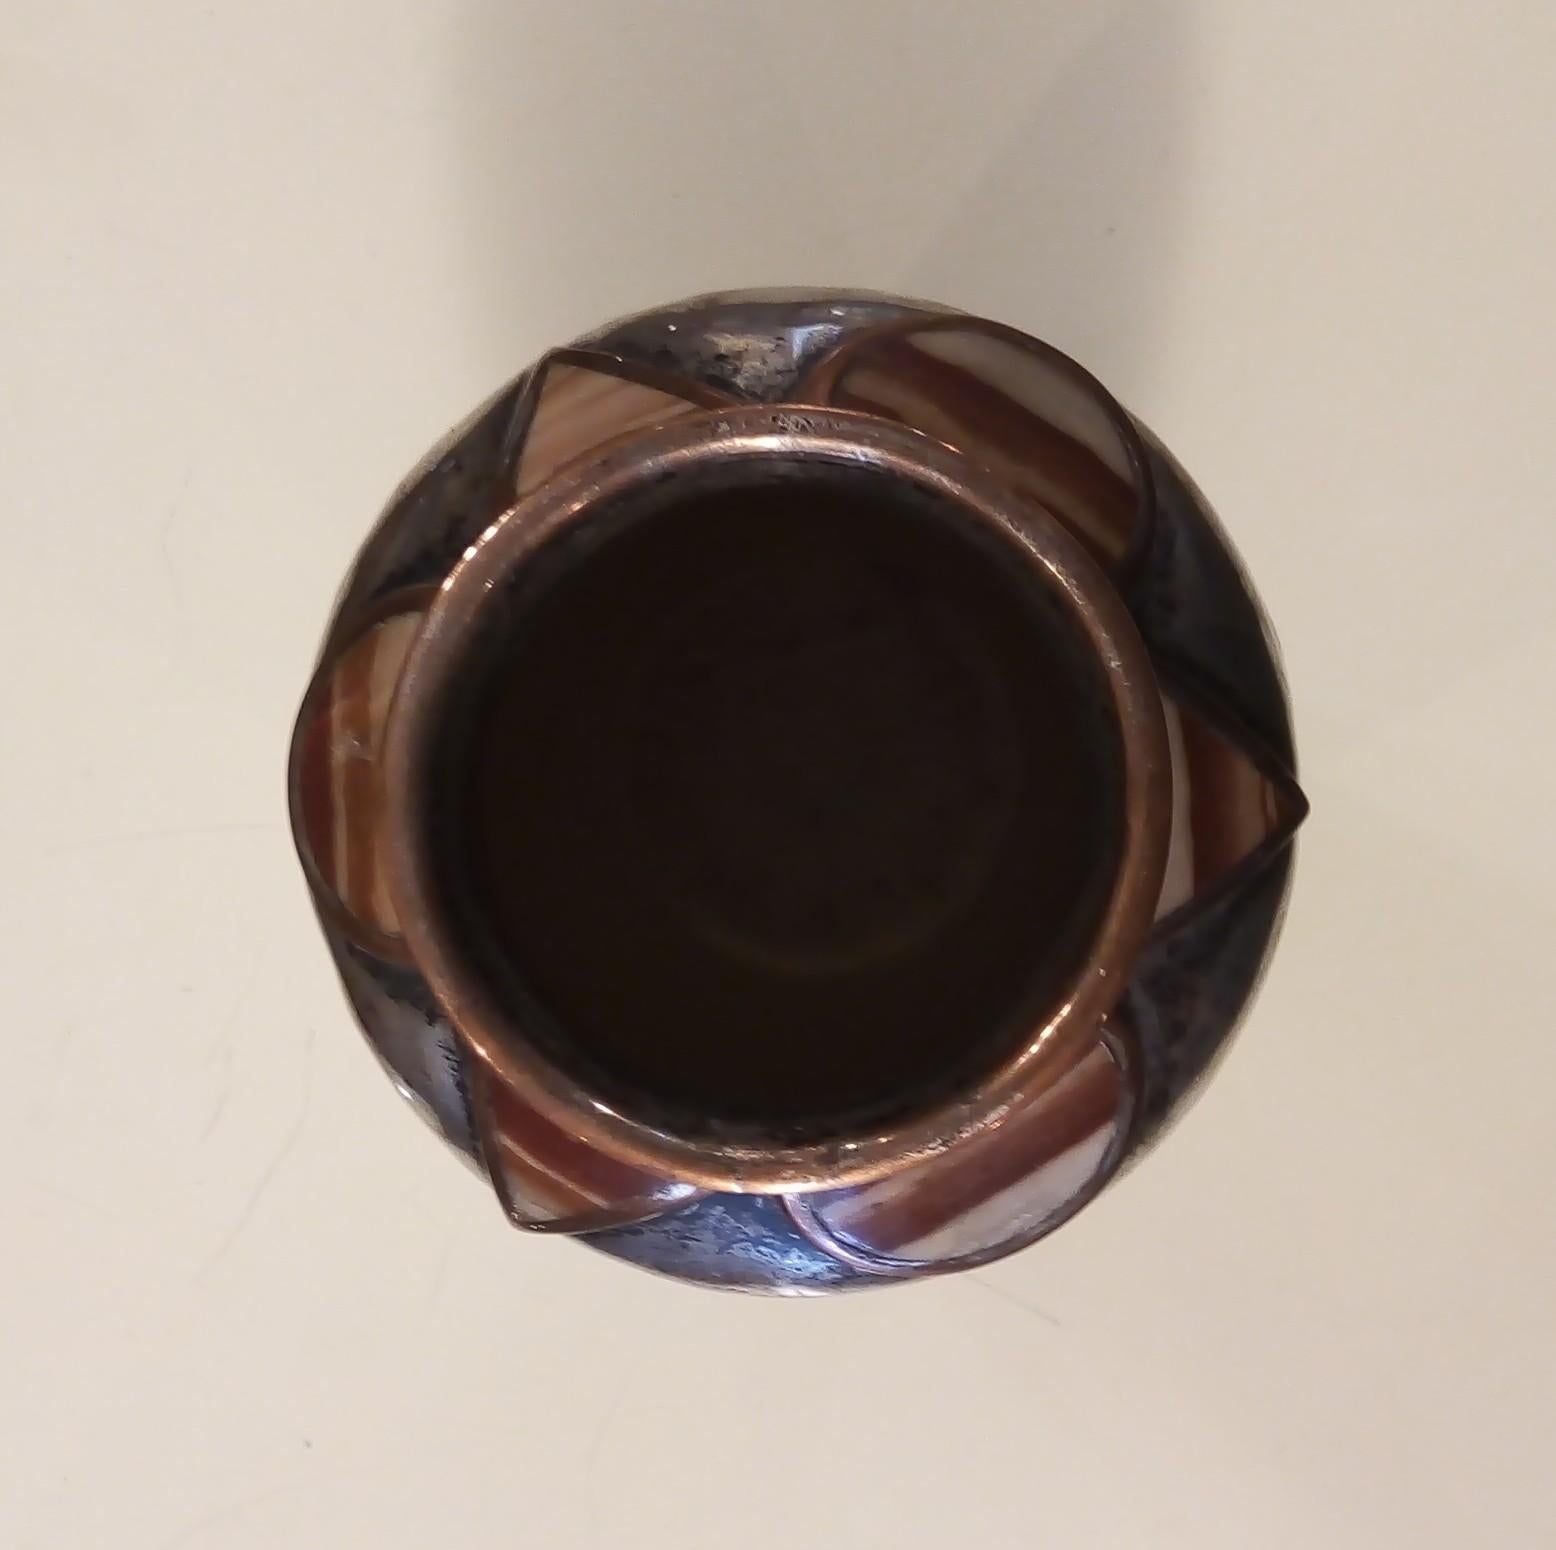 Late 20th Century Special Vase in Plated Hammered Copper and Onyx Inlays by Emilia Castillo Taxco